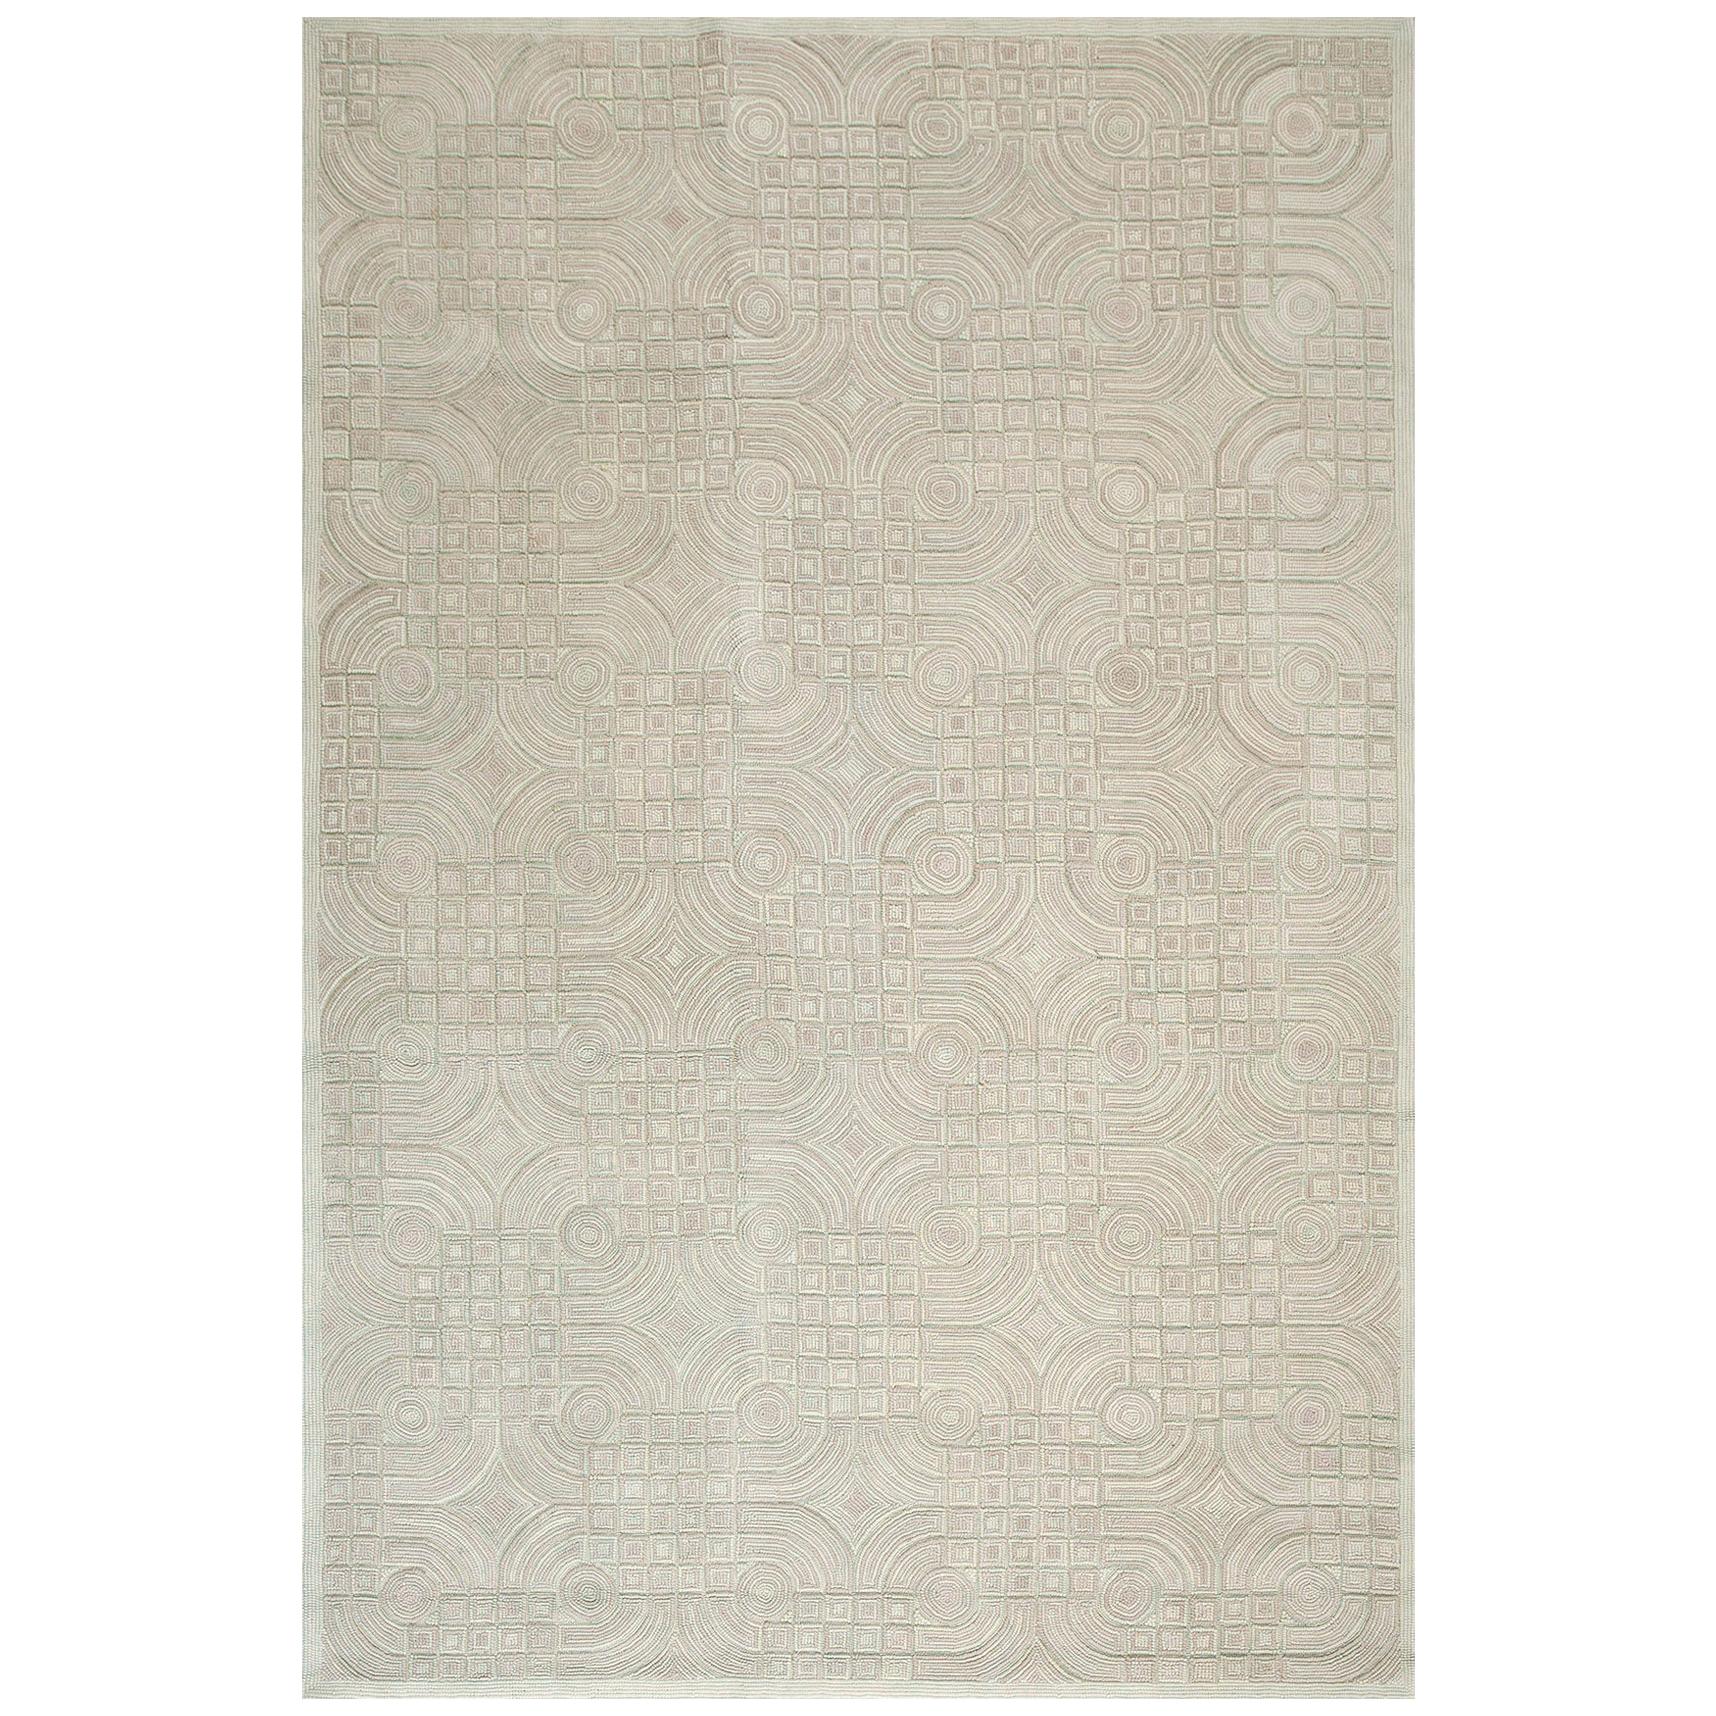 Contemporary American Hooked Rug (8' x 10' - 244 x 305 )